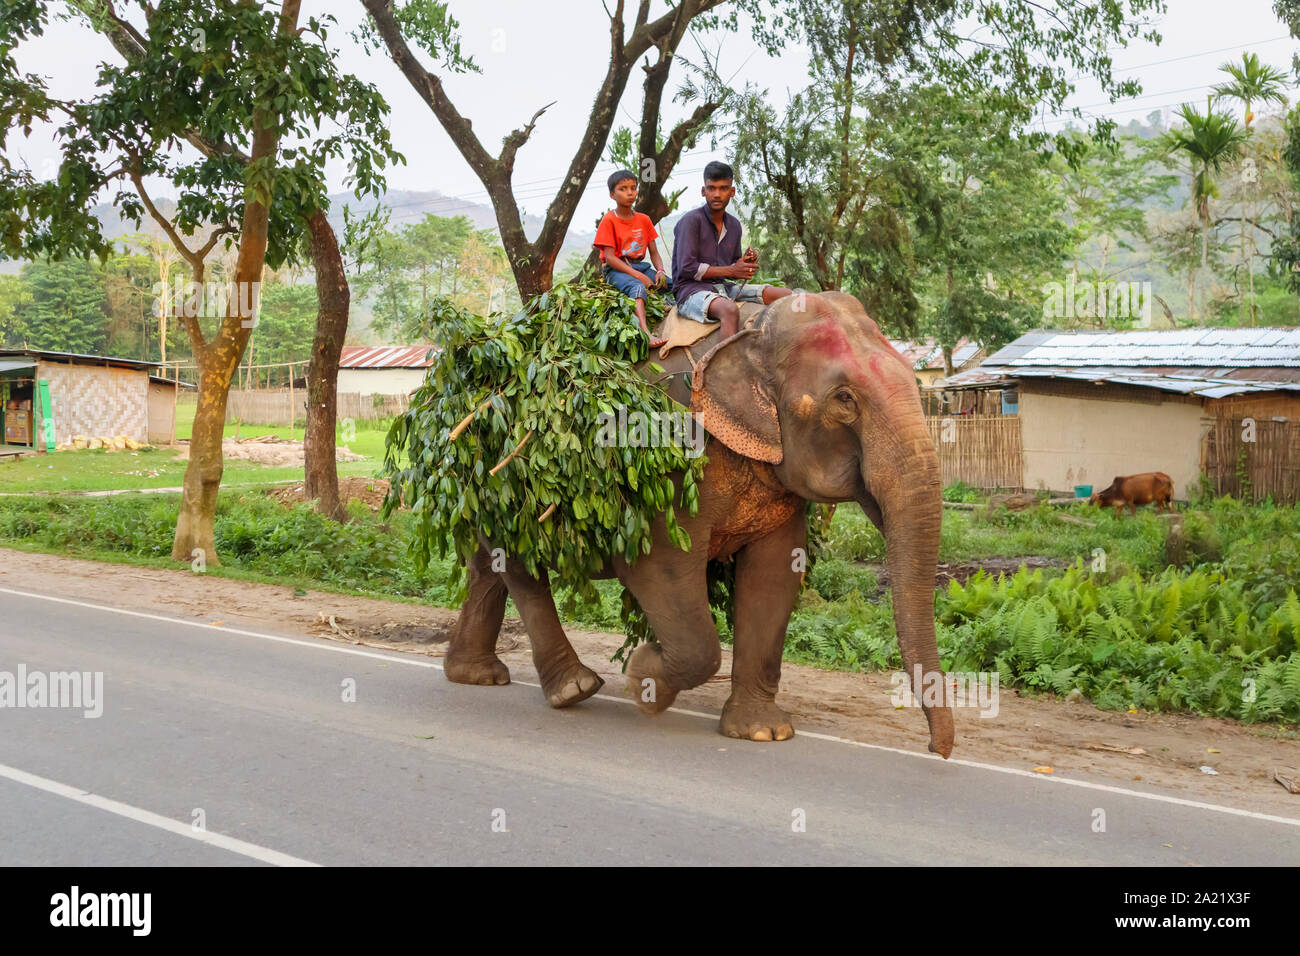 Street scene in Kaziranga, Assam, India: a working Indian Elephant with its mahout and a child walks along a road carrying a load of leafy branches Stock Photo